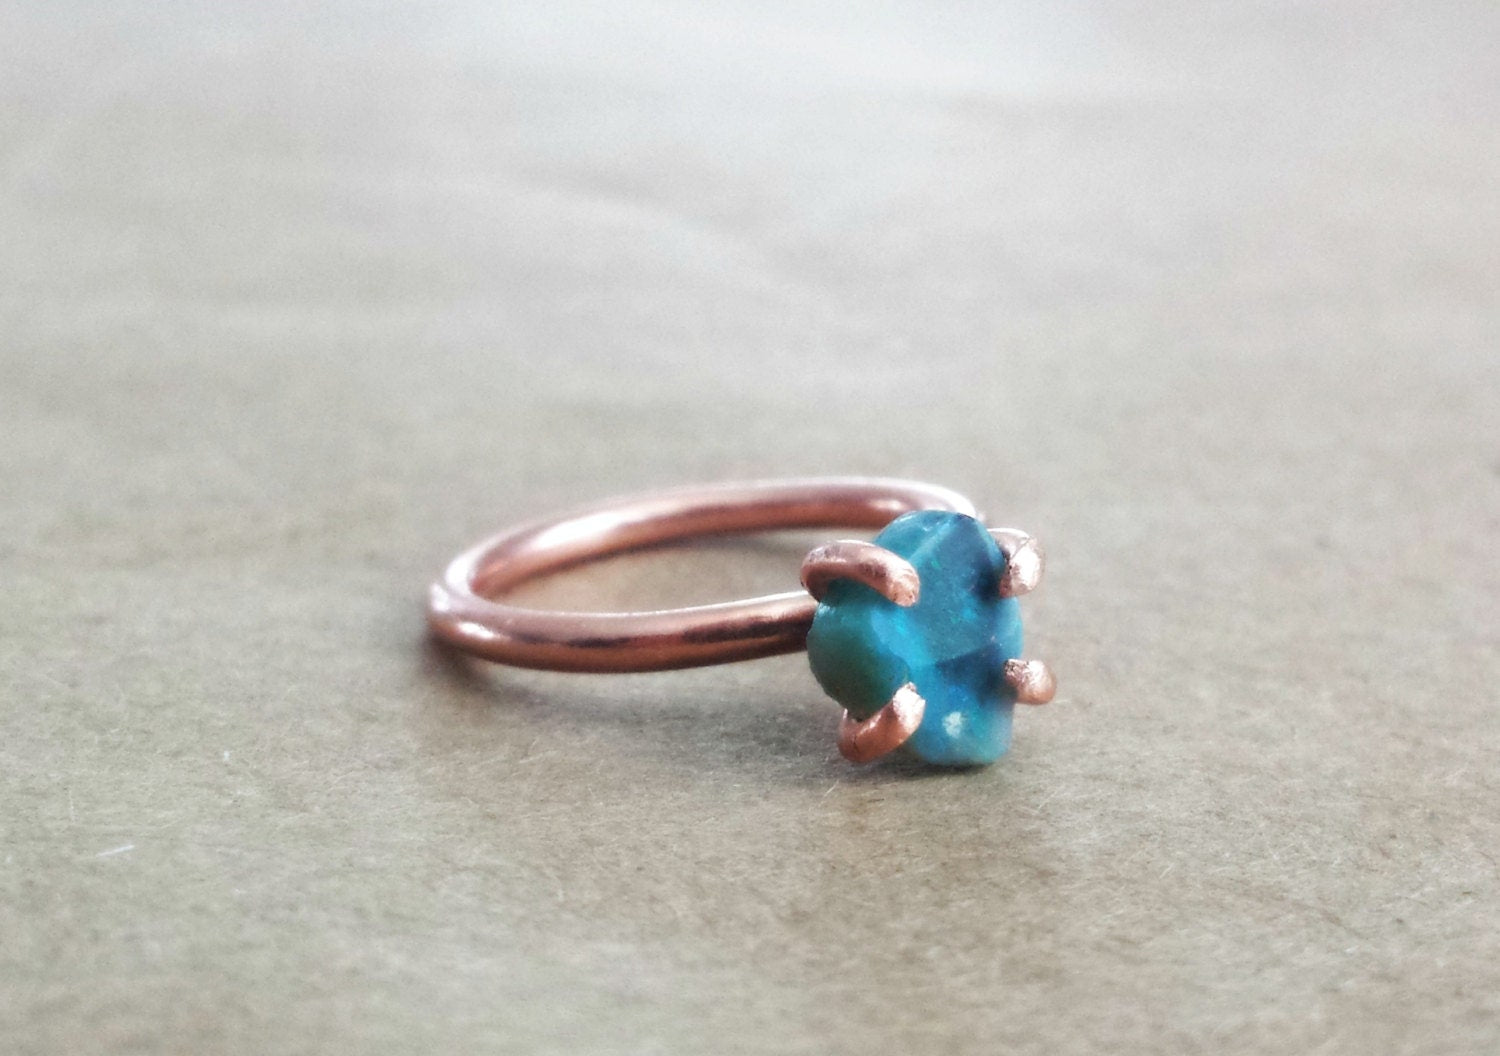 Raw Opal and Copper Ring, Rough Uncut Opal Ring, Hand Forged Jewelry, Bridal Gift, October Birthstone Ring, Luxury Birthday, Girlfriend Ring